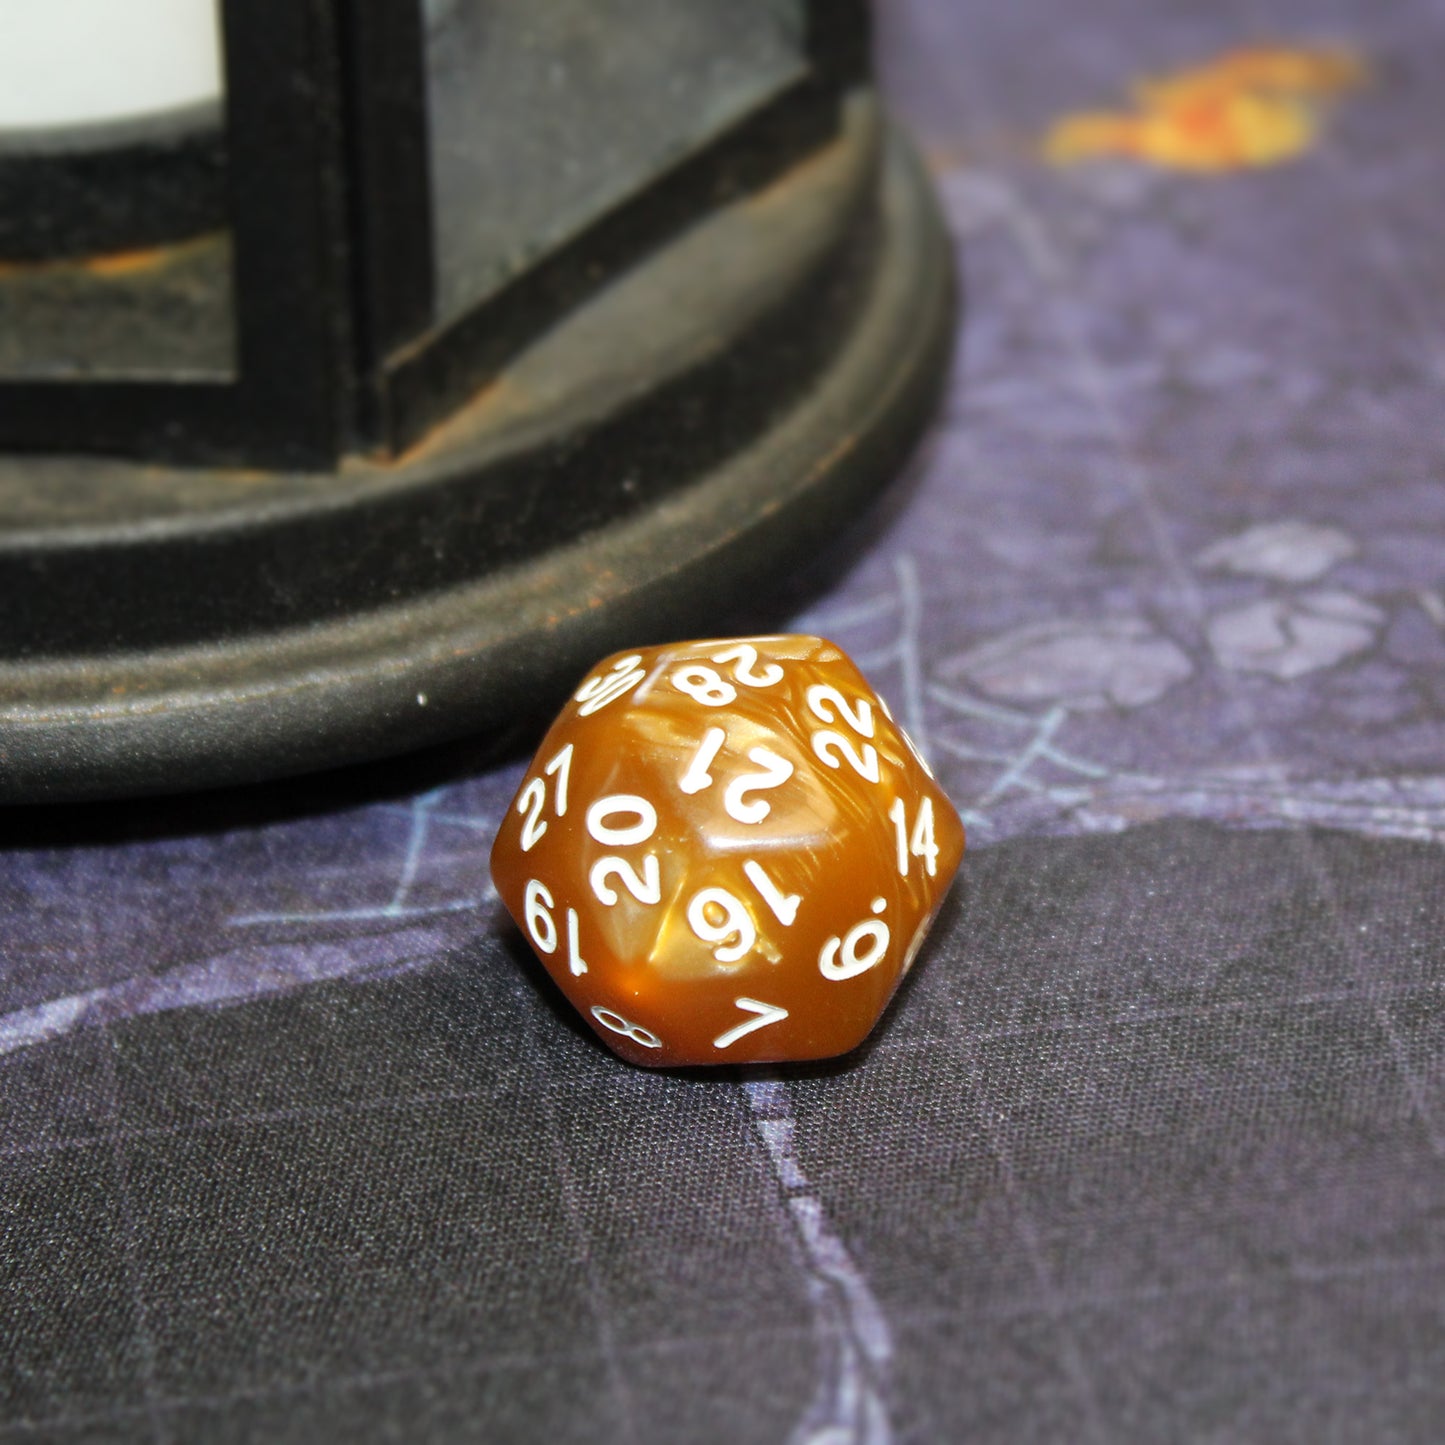 D30 Golden Pearl Polymer Dice